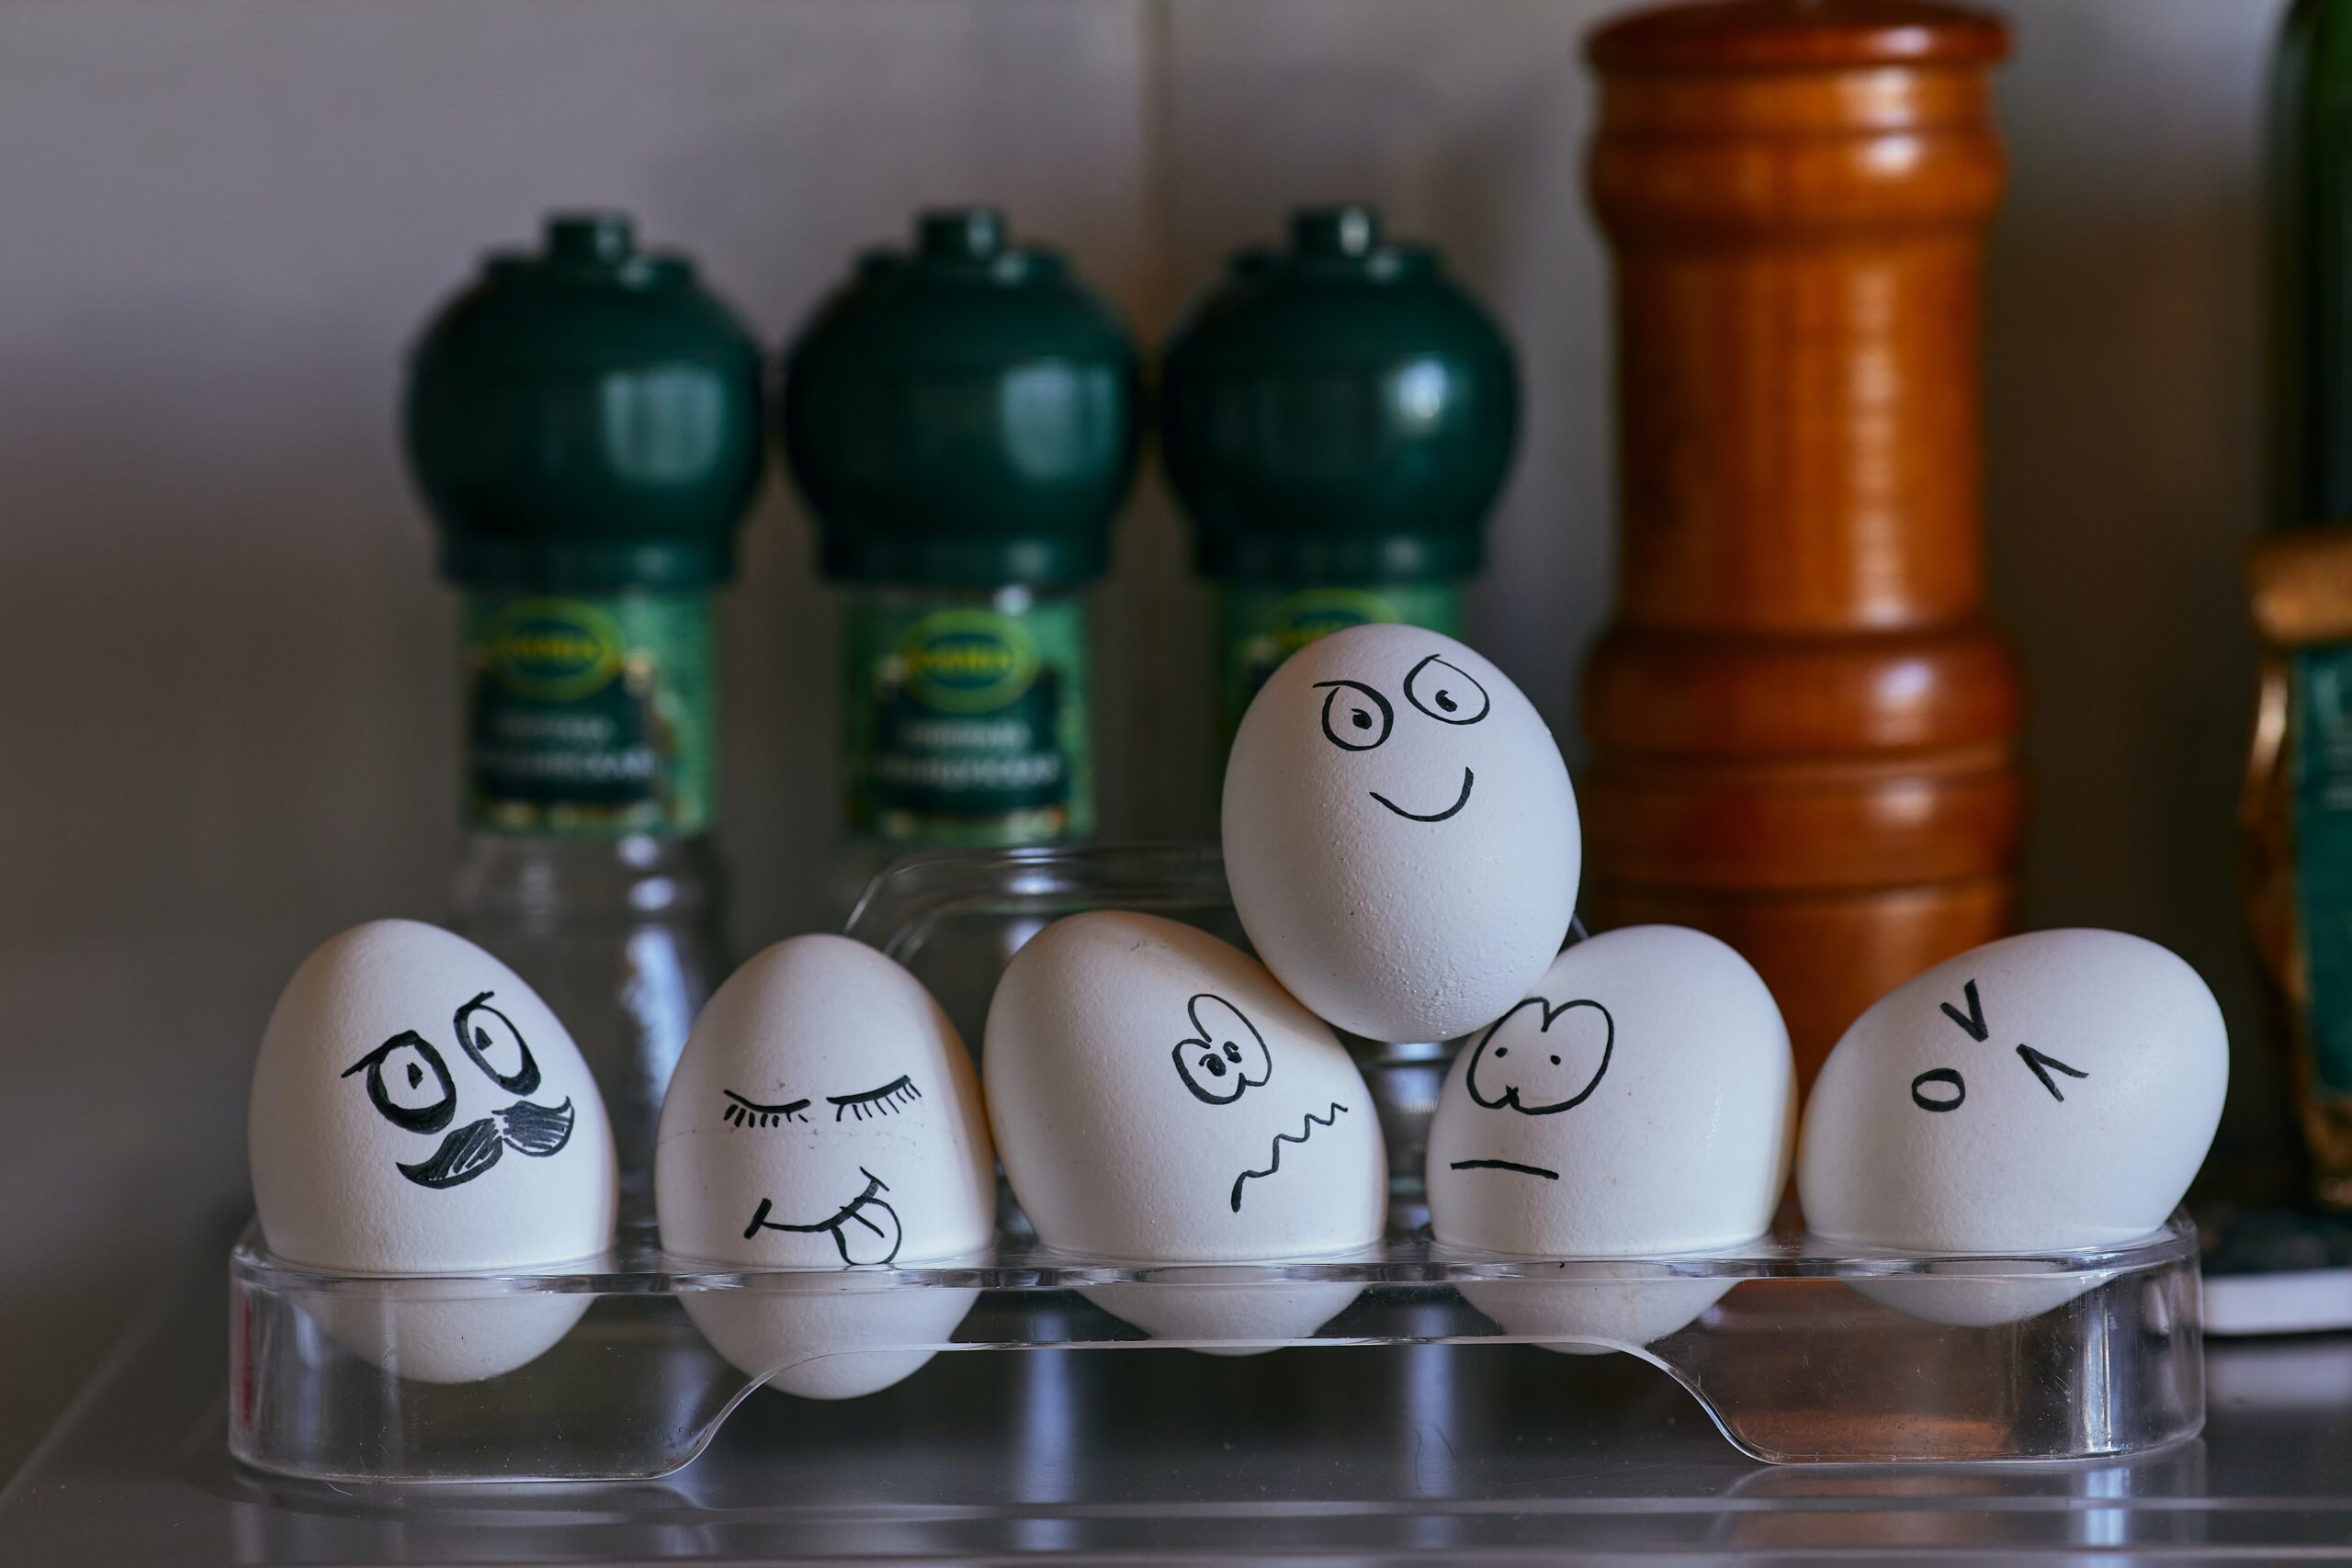 six eggs with different face expression drawn on each arranged in an egg tray.